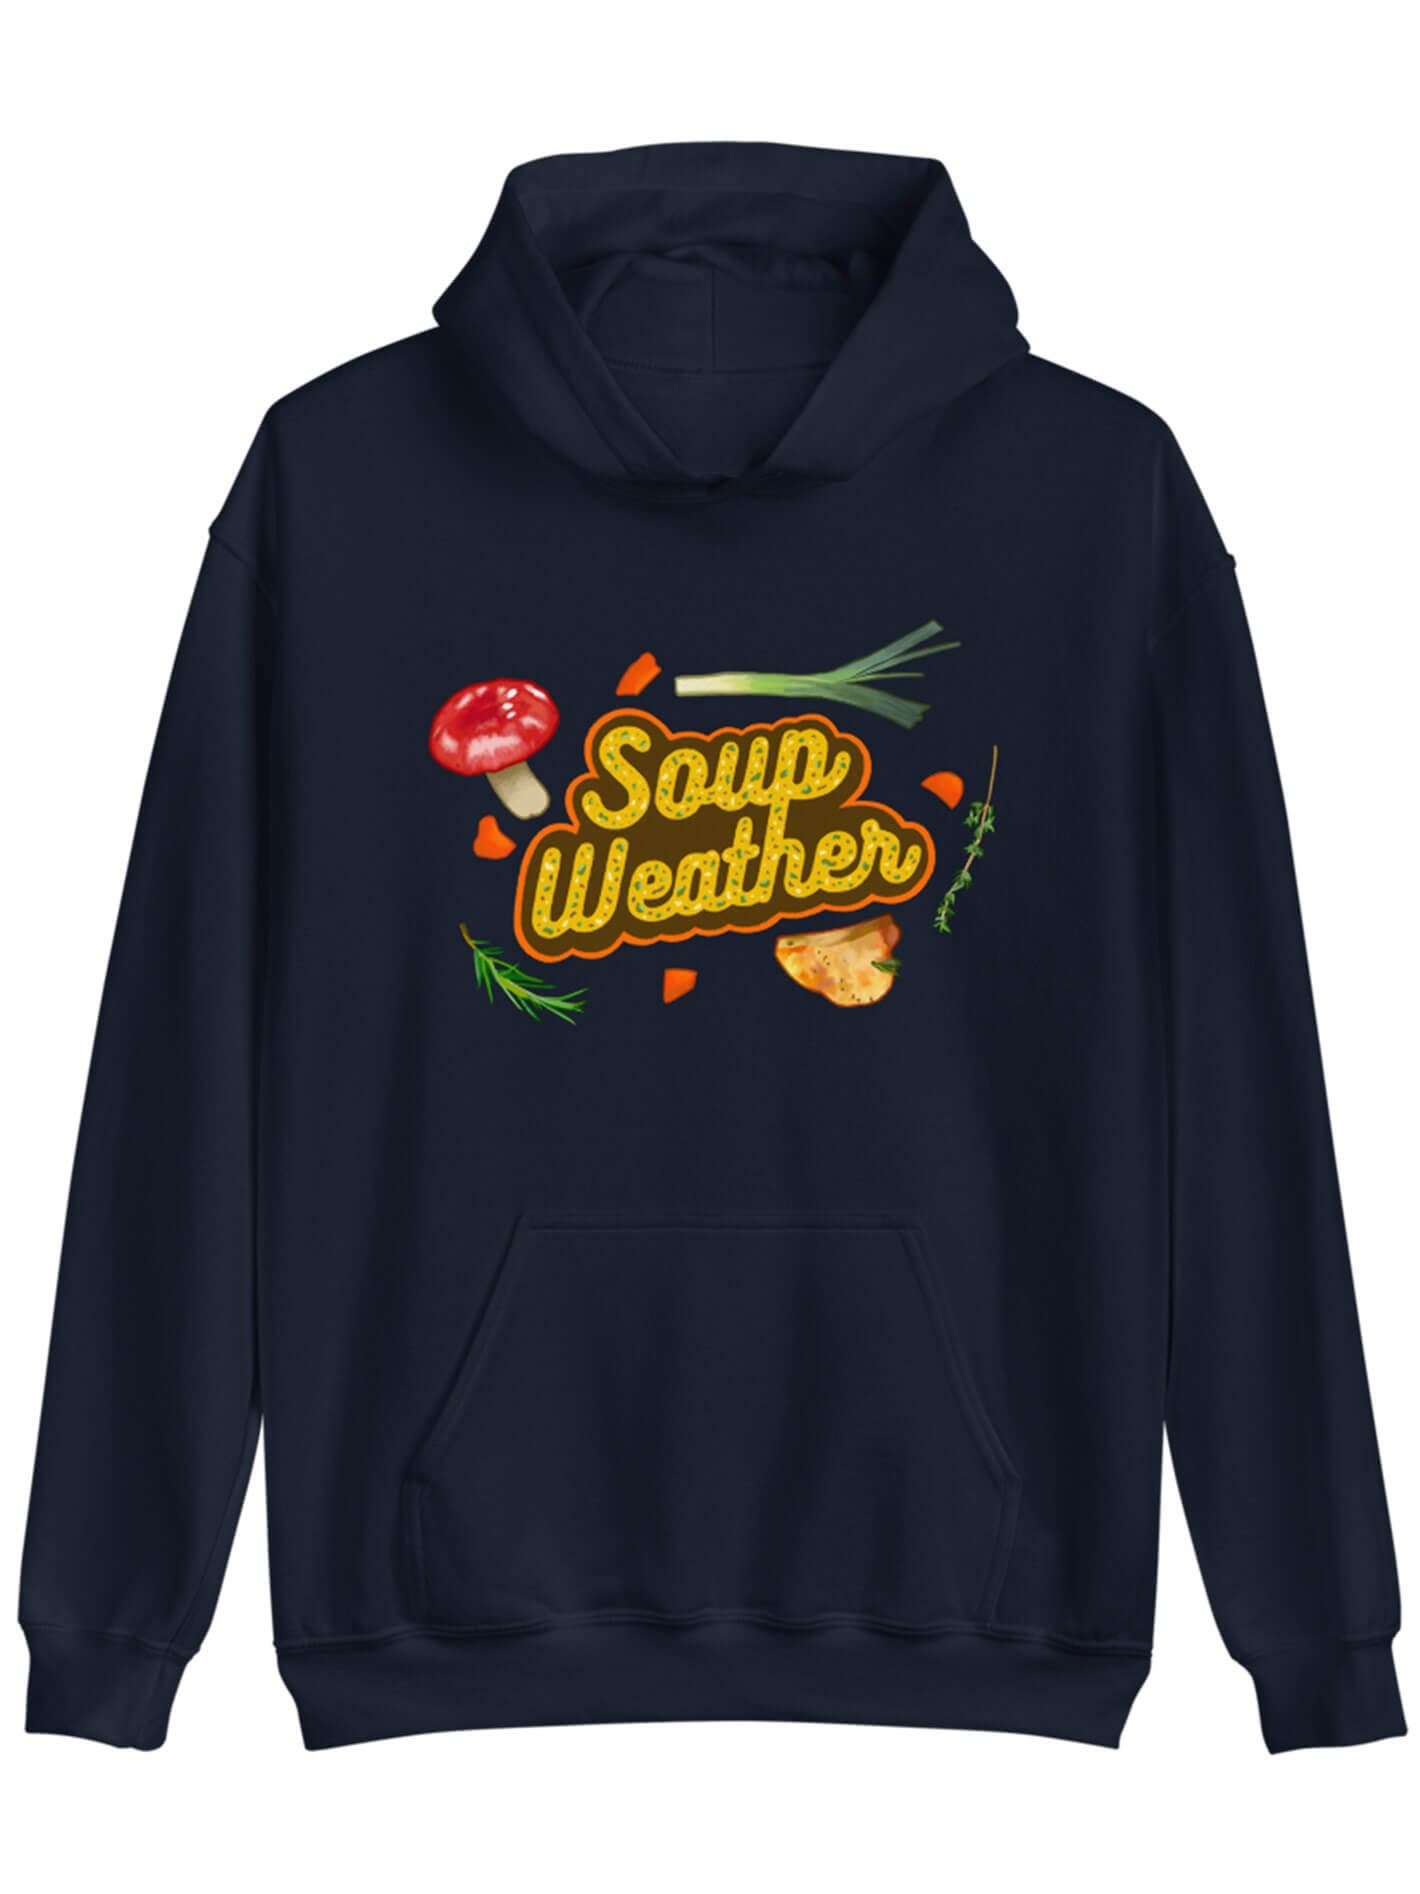 Soup weather cottage core hoodie.